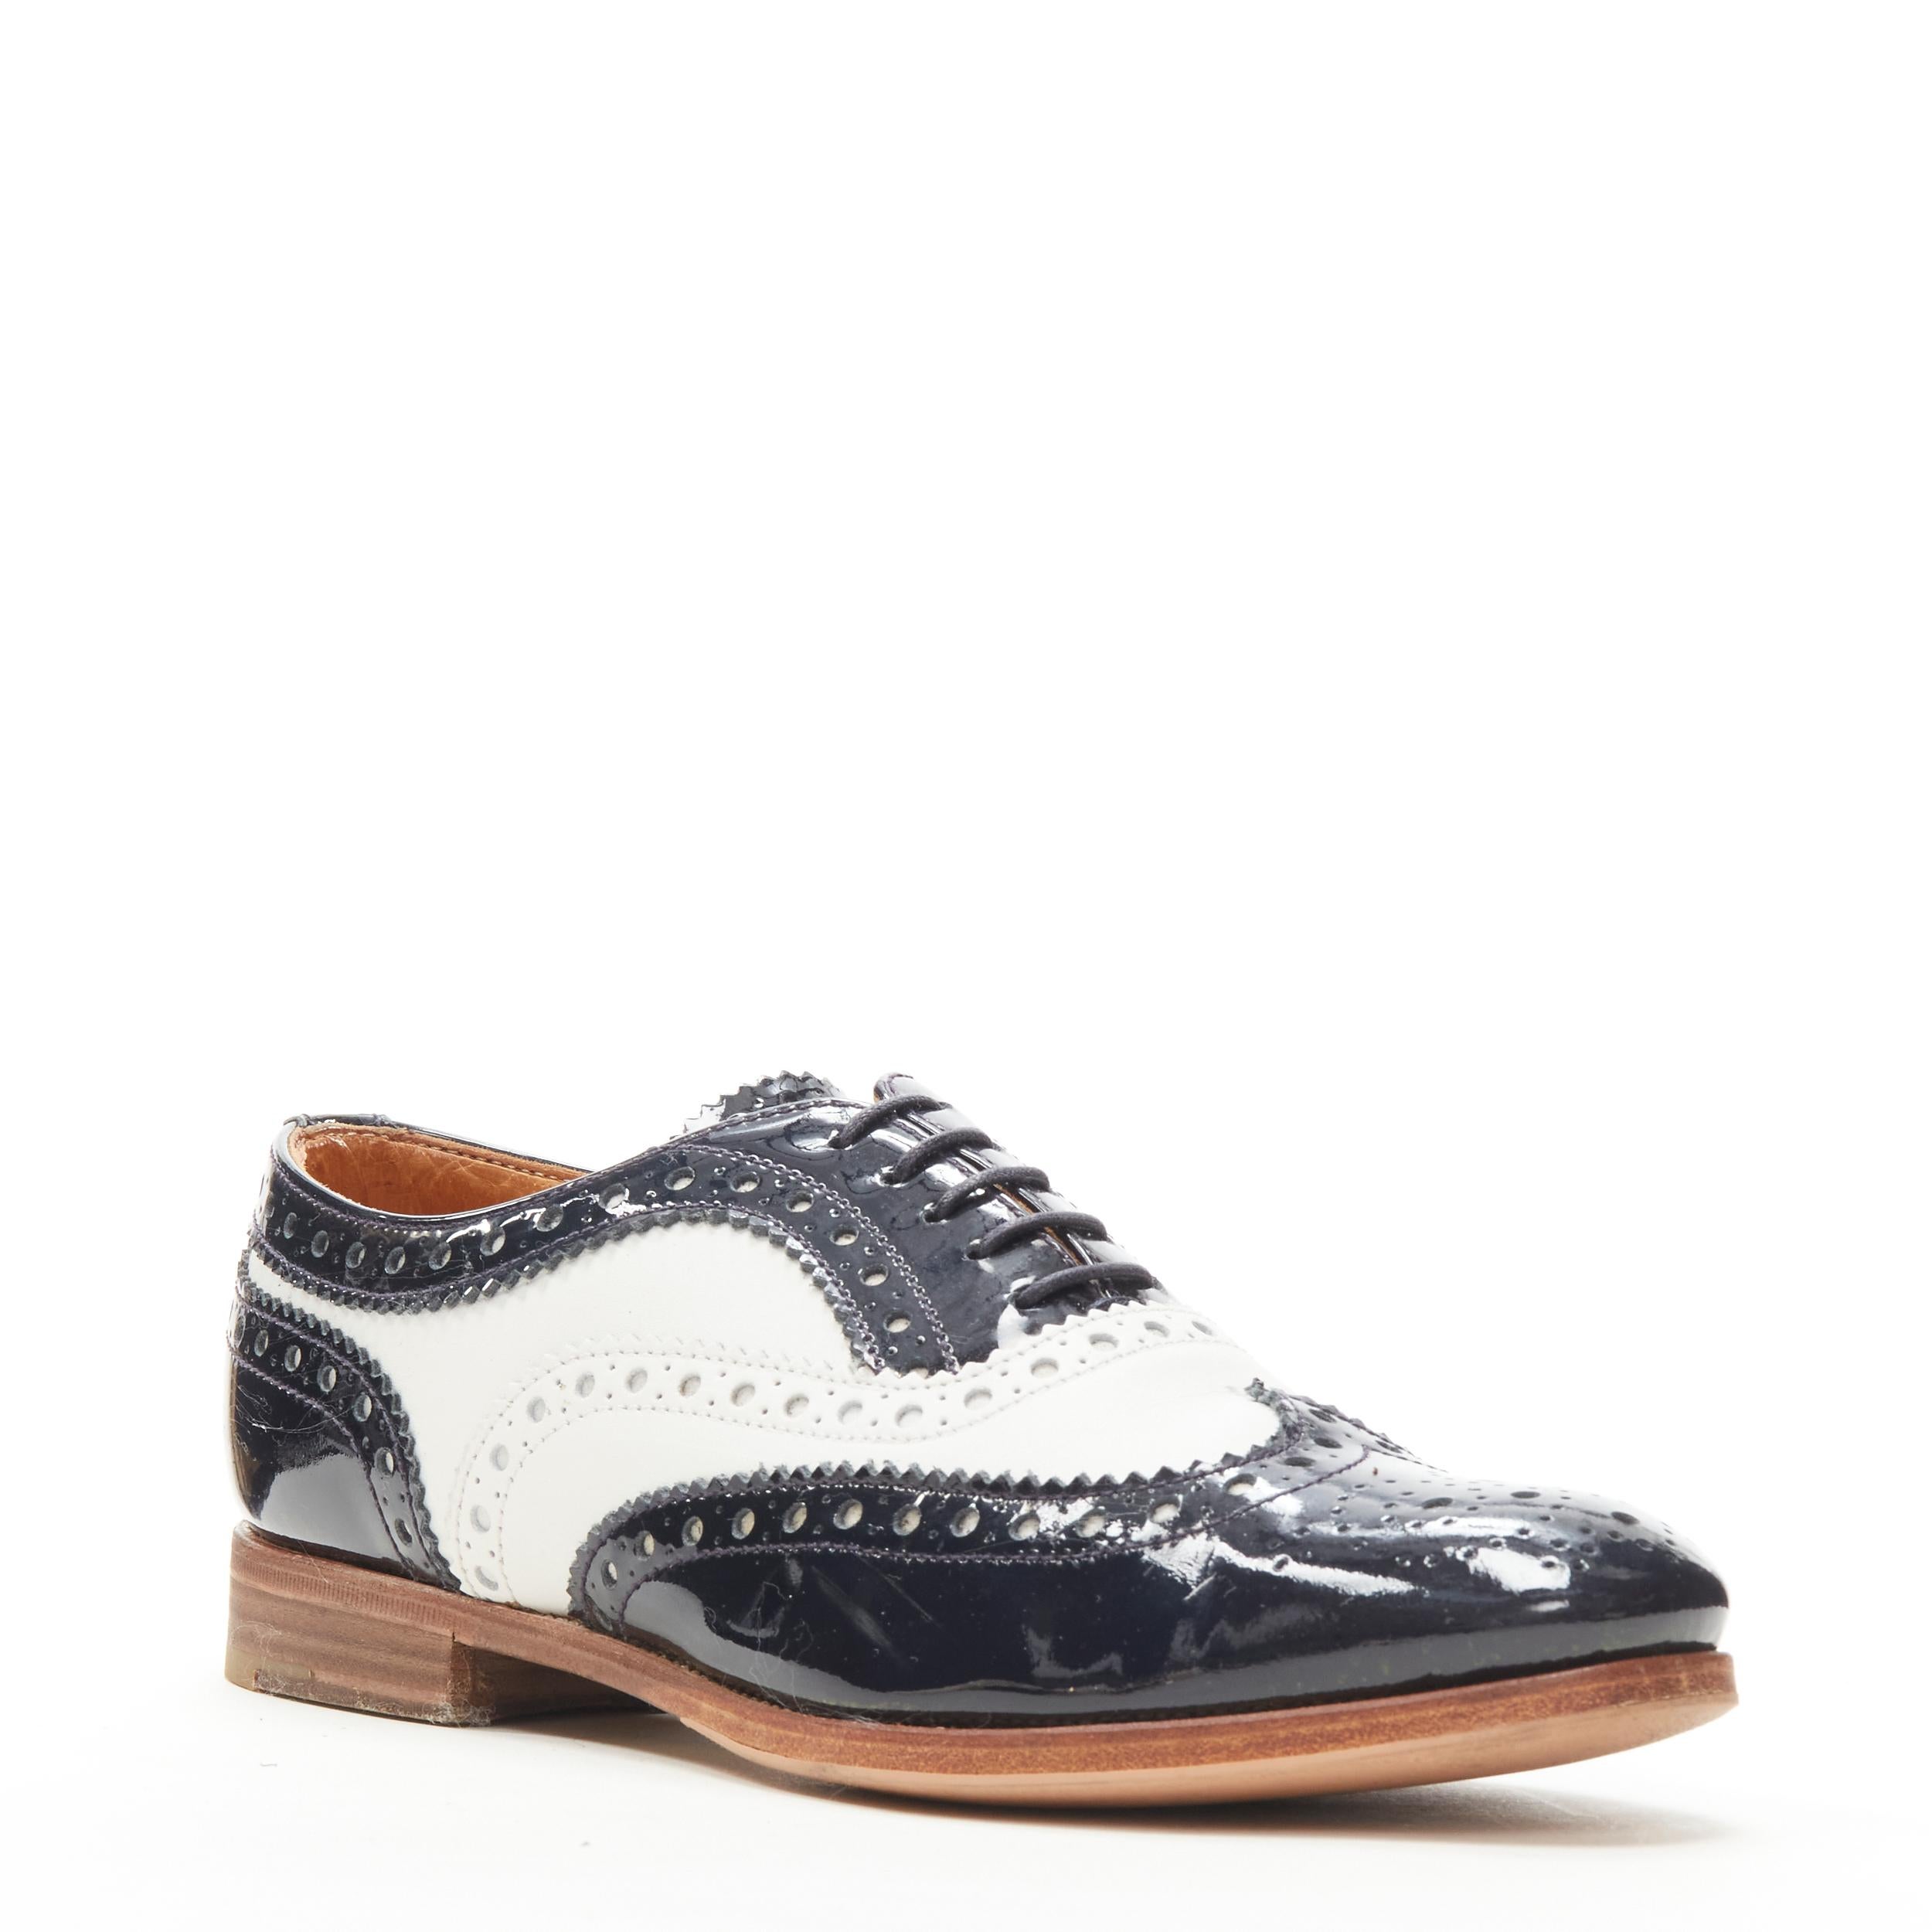 CHURCH'S Burwood black patent white perforated leather brogue EU36 
Reference: ANWU/A00381 
Brand: Church's 
Model: Burwood 
Material: Leather 
Color: Black 
Pattern: Solid 
Closure: Lace 
Extra Detail: Stacked wooden sole. 
Made in: Italy